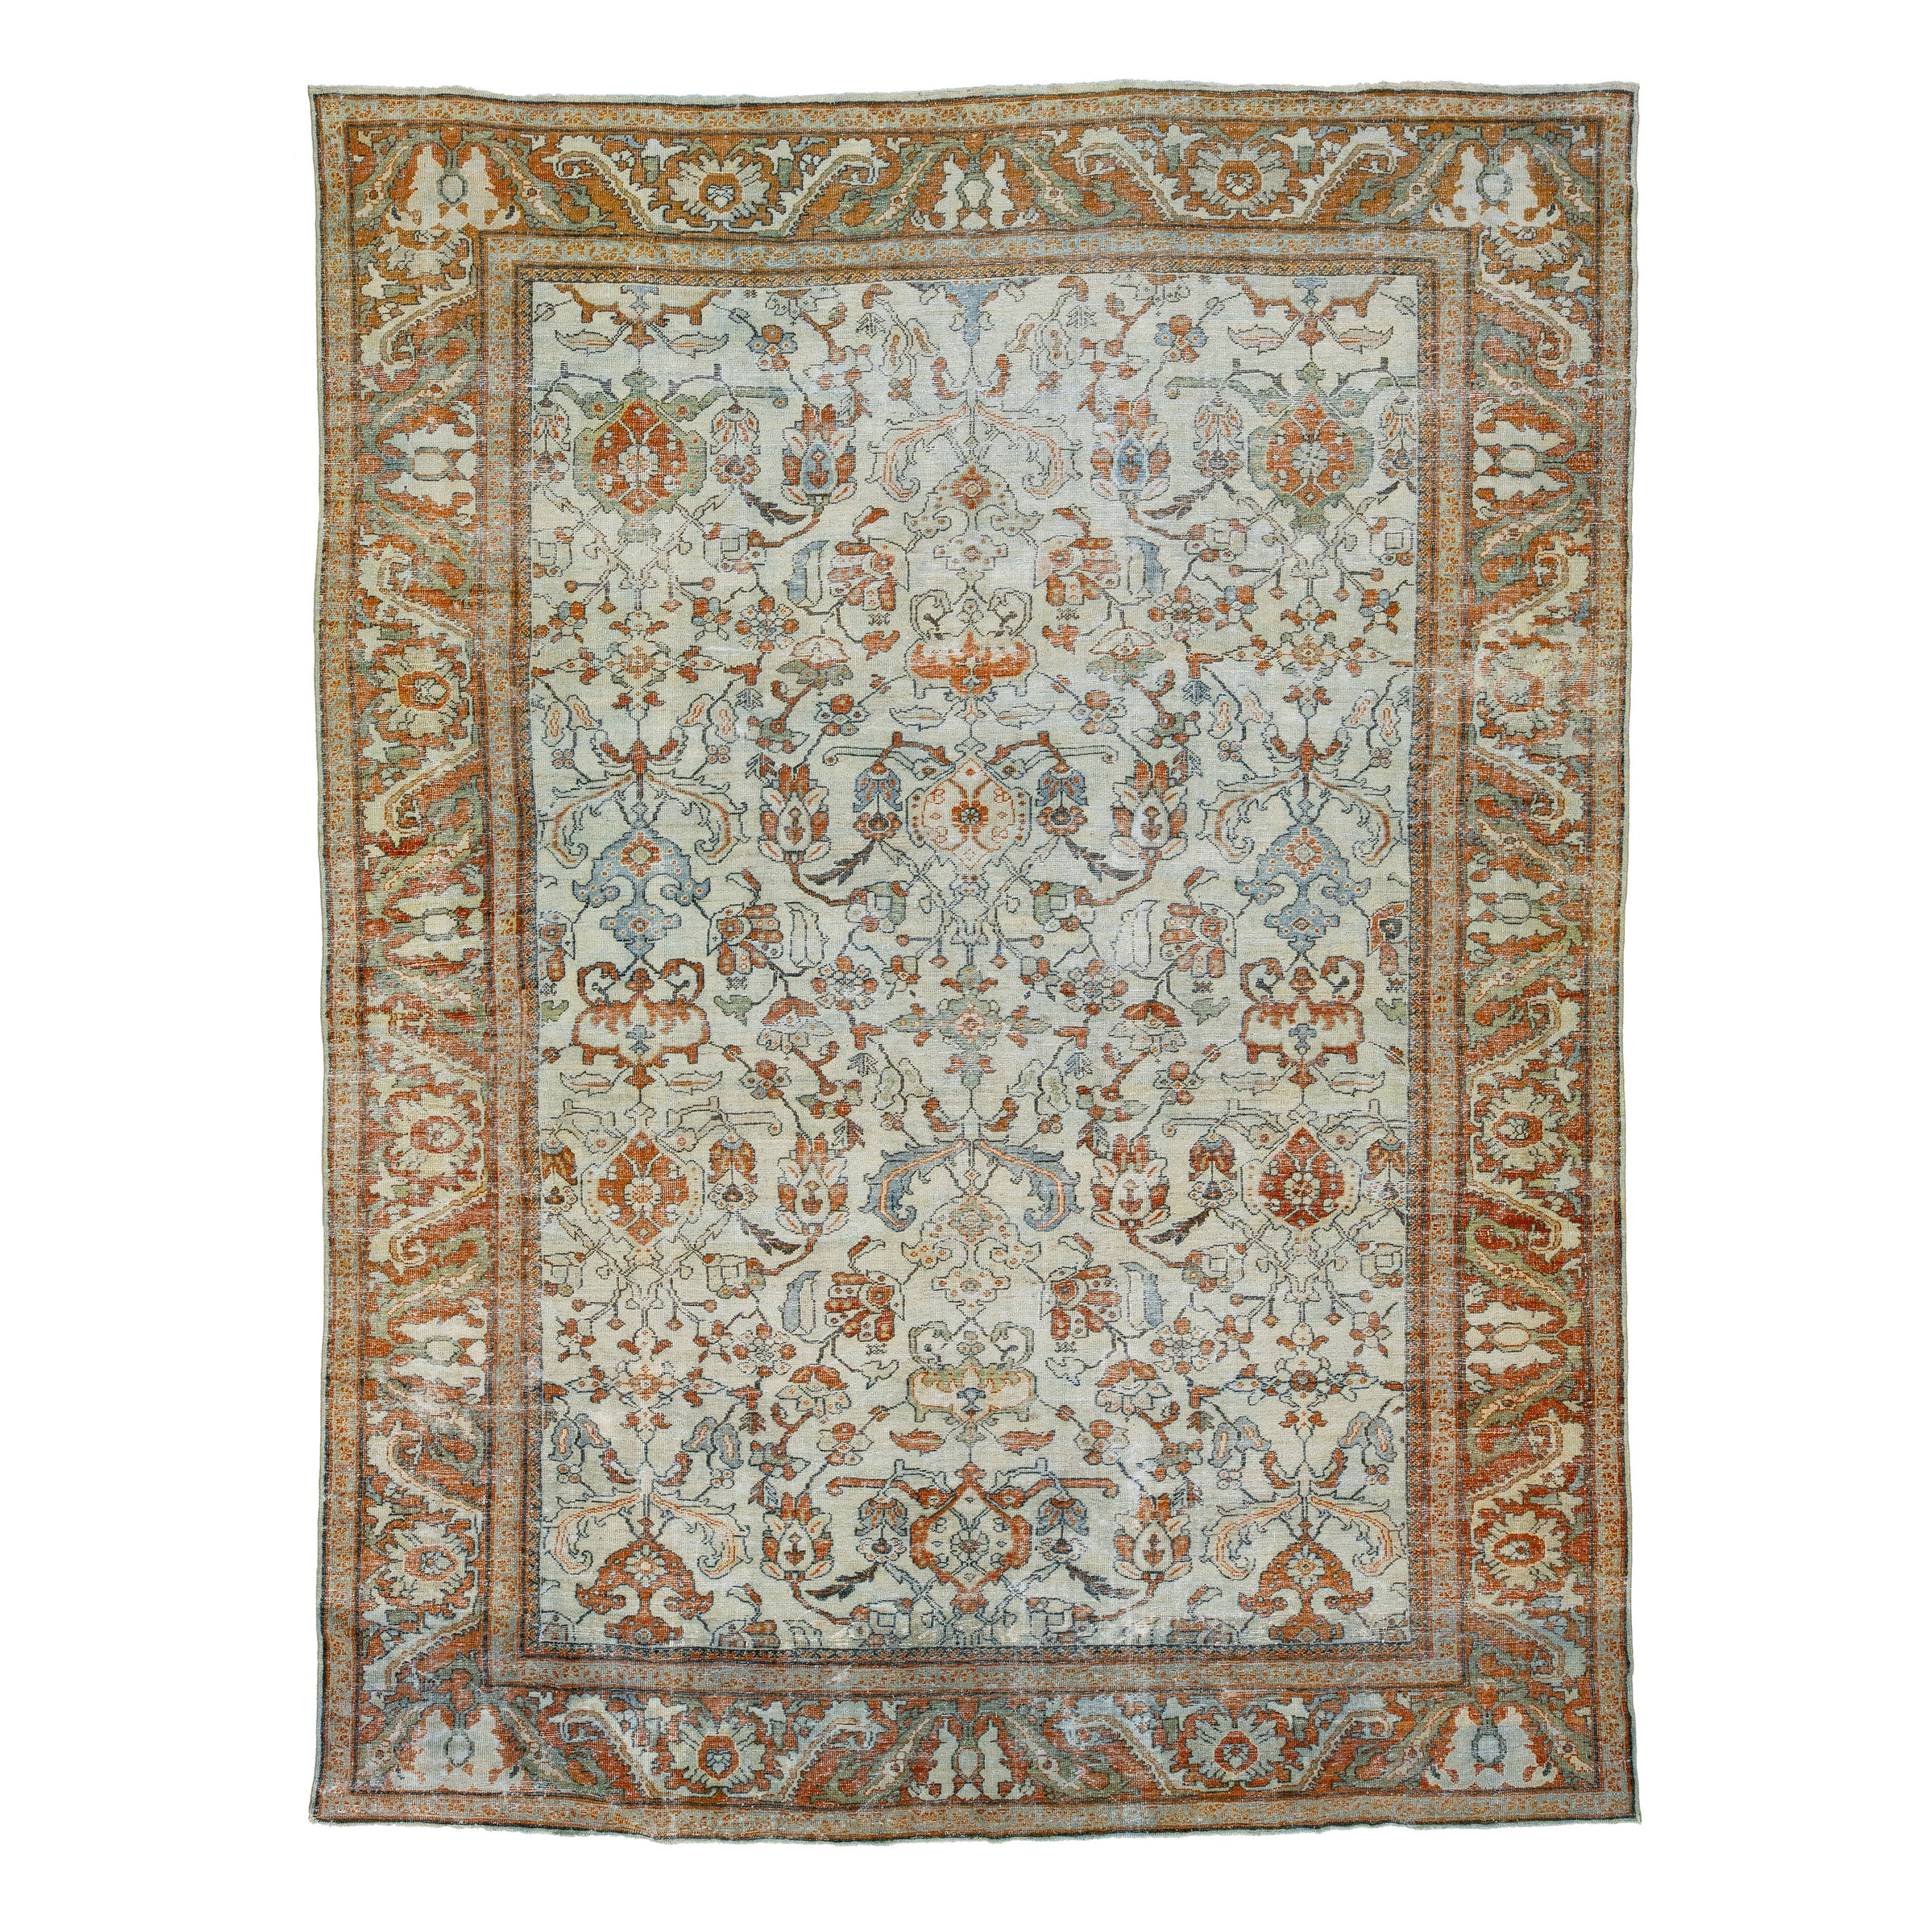 Persian Antique Mahal Beige And Orange Wool Rug with Allover Pattern